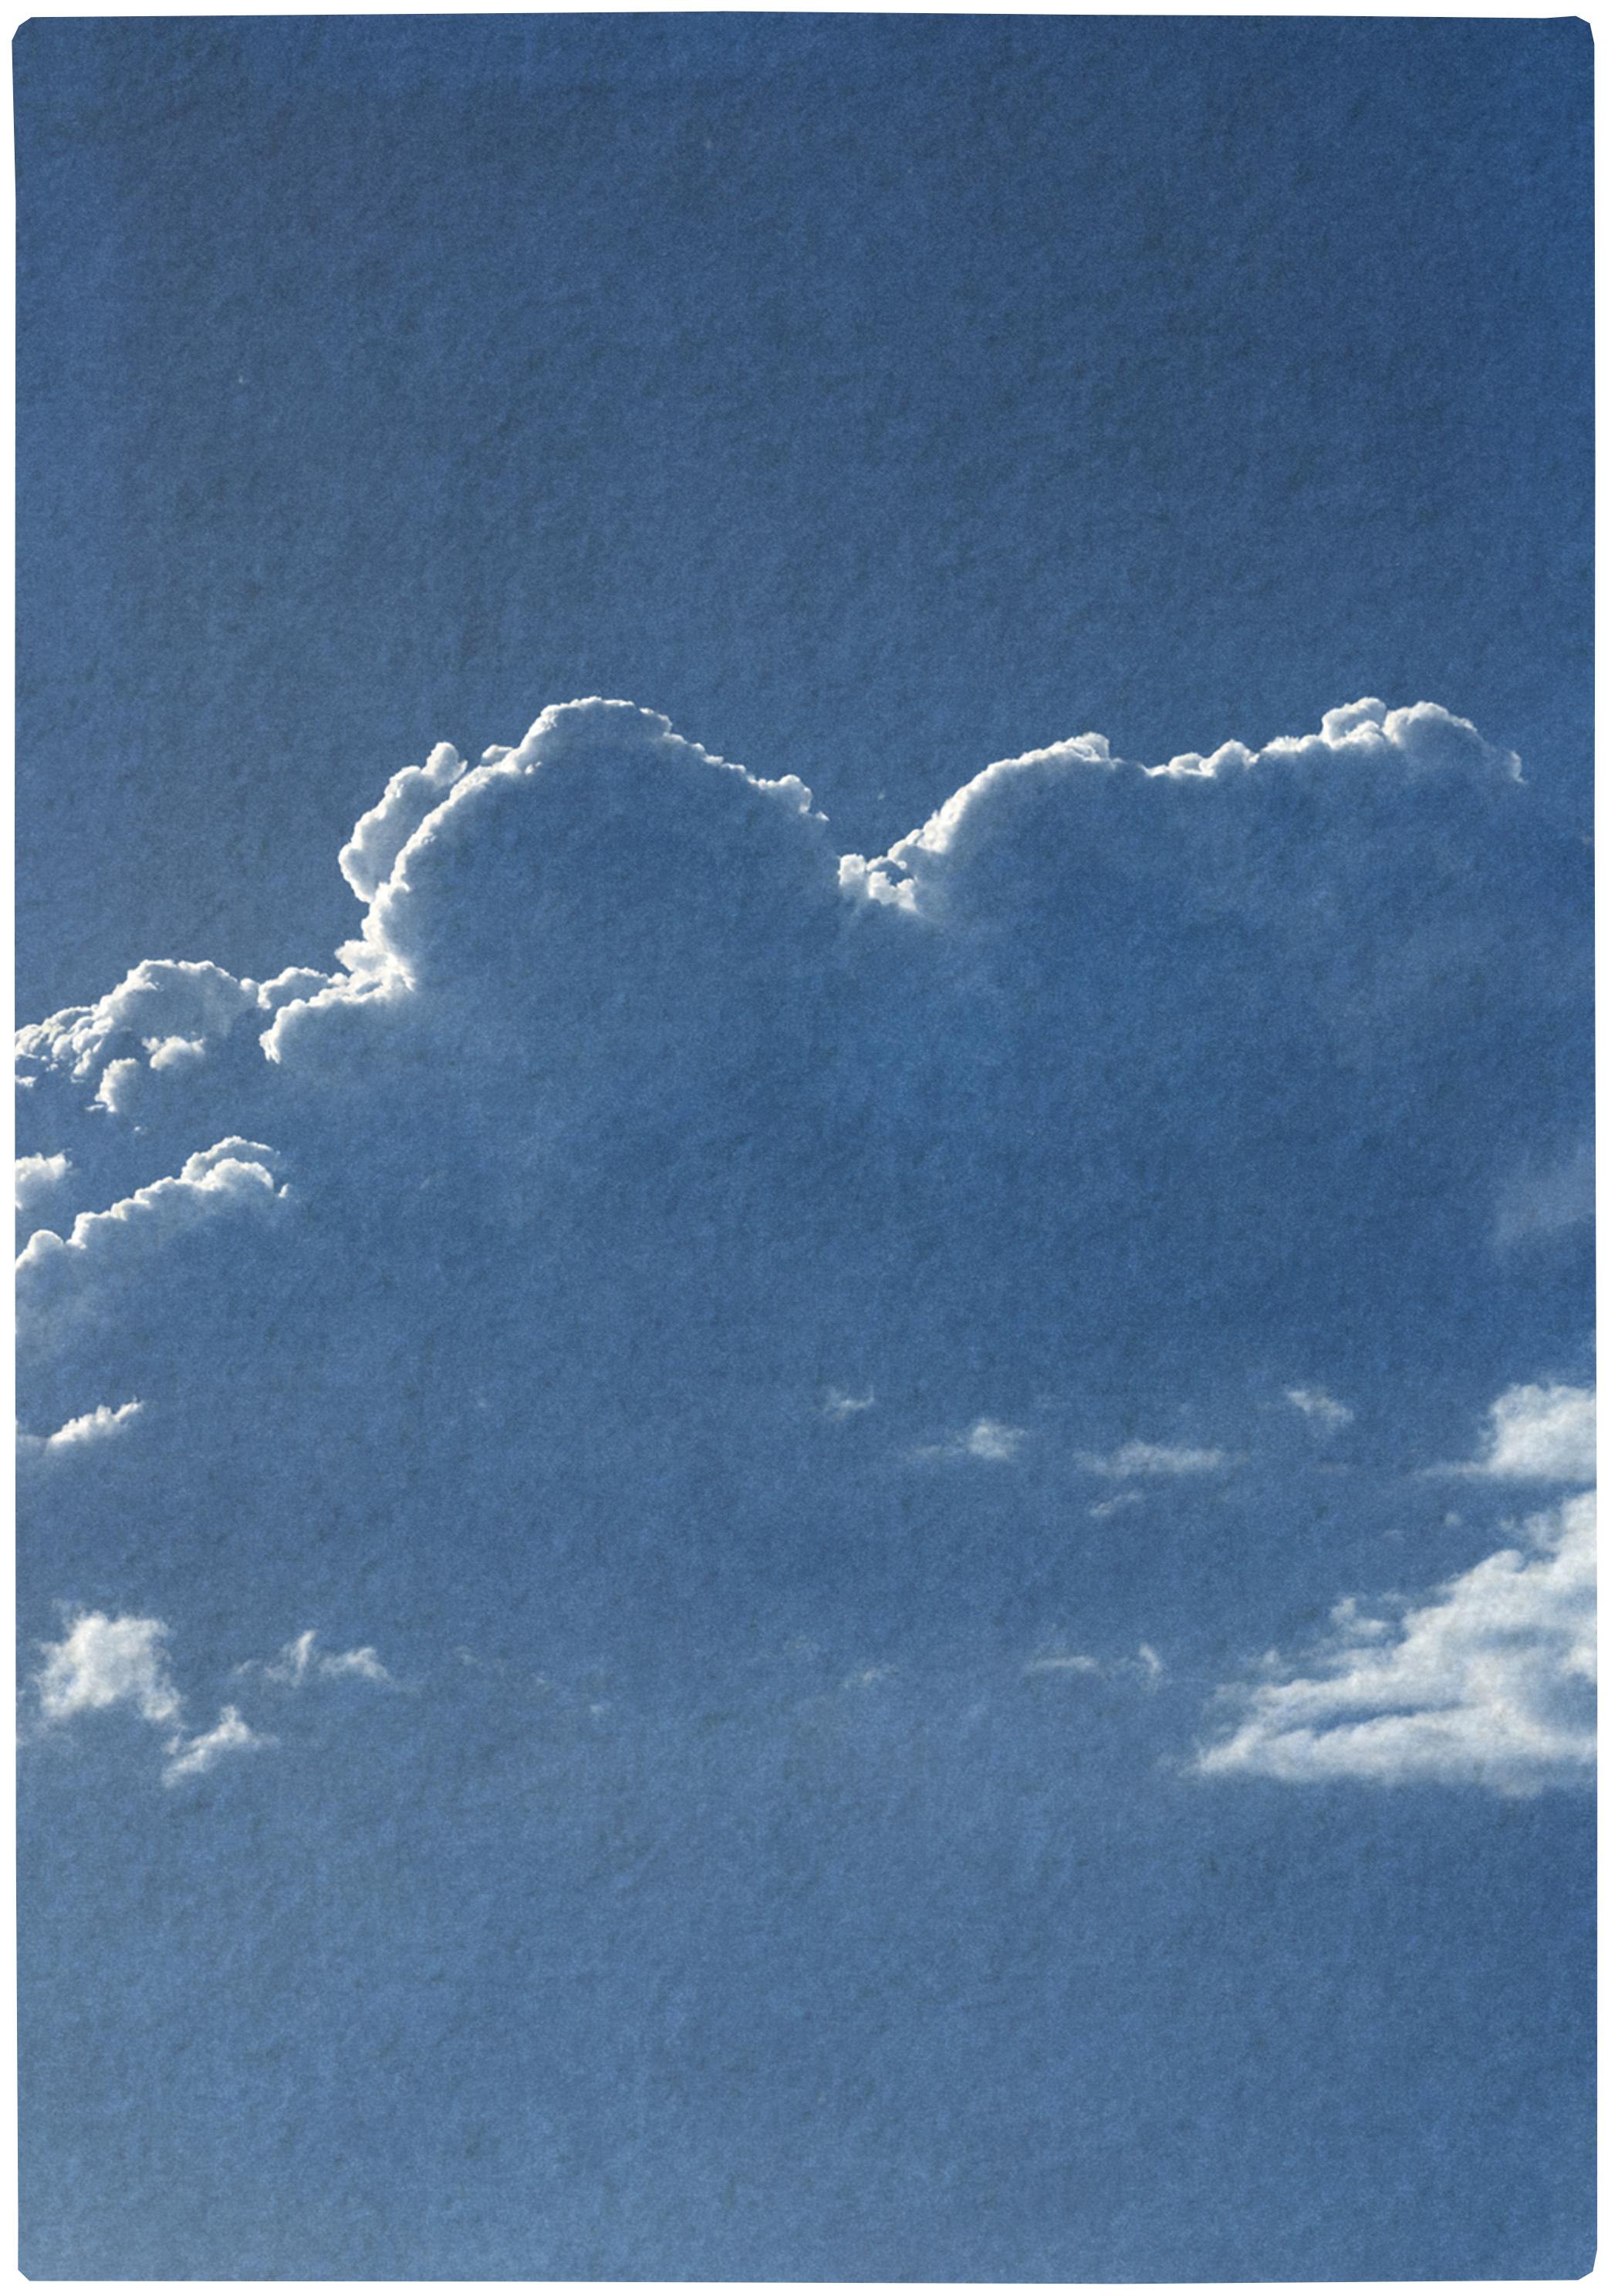 This is an exclusive handprinted limited edition of a cyanotype print. 
This gorgeous triptych portraits a serene evening cloud traveling through the sky. 

Details:
+ Title: Serene Cloudy Sky
+ Year: 2021
+ Edition Size: 100
+ Stamped and